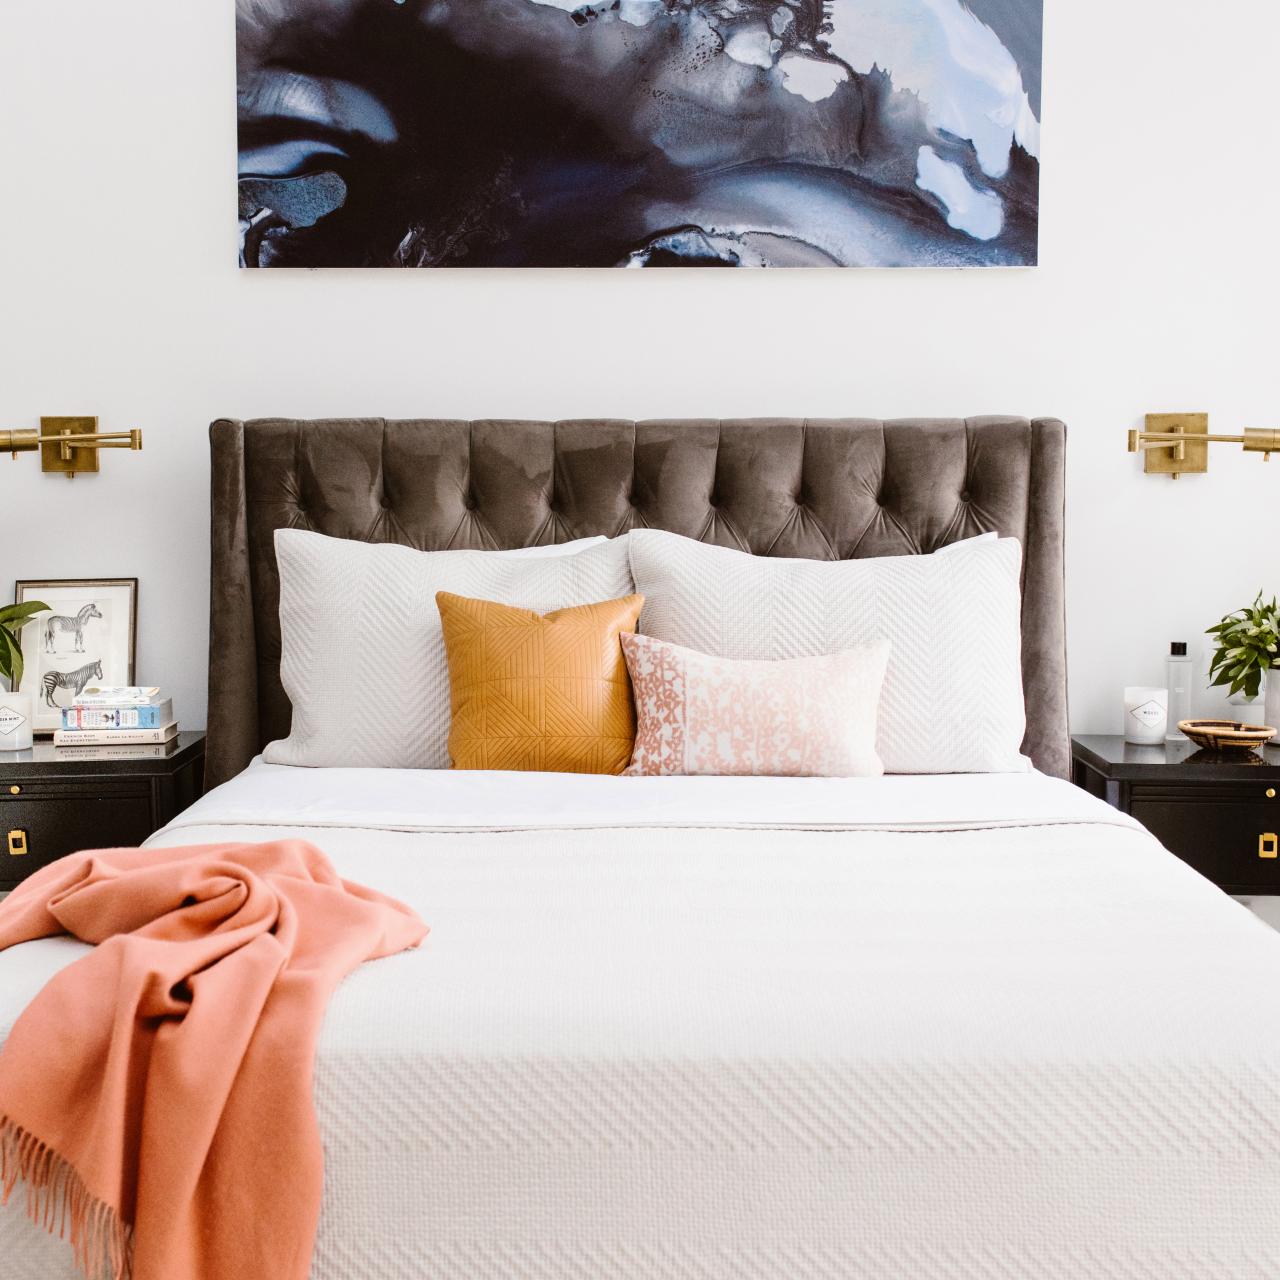 12 Easy Ways to Keep Your Bedroom Organized